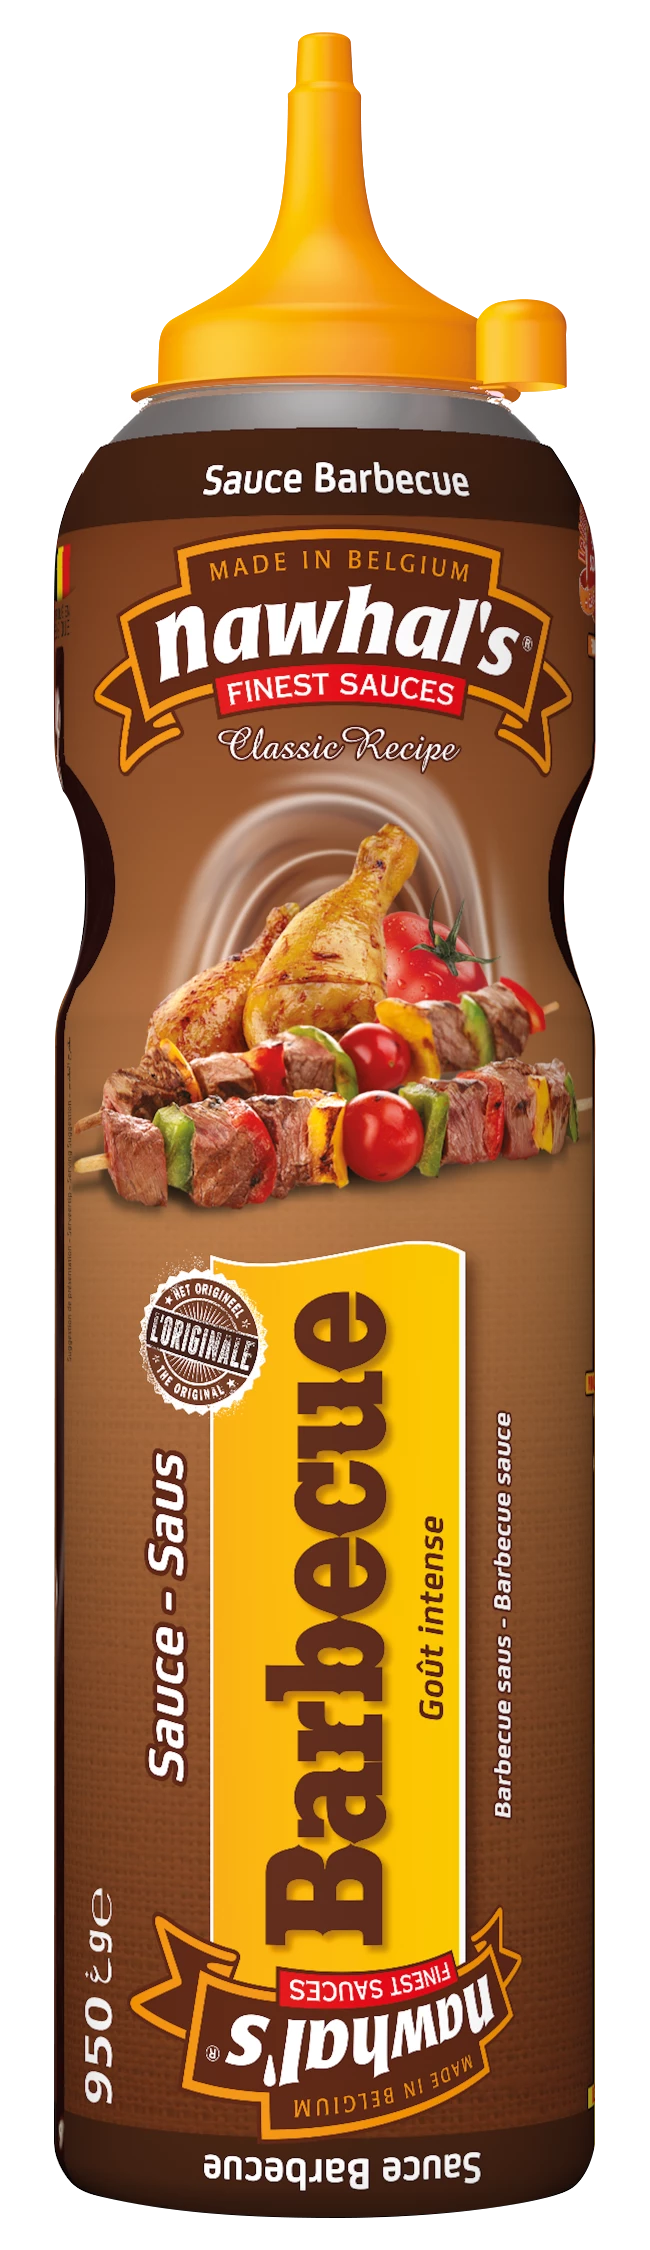 Sauce Barbecue 950gr / 950ml - NAWHAL'S